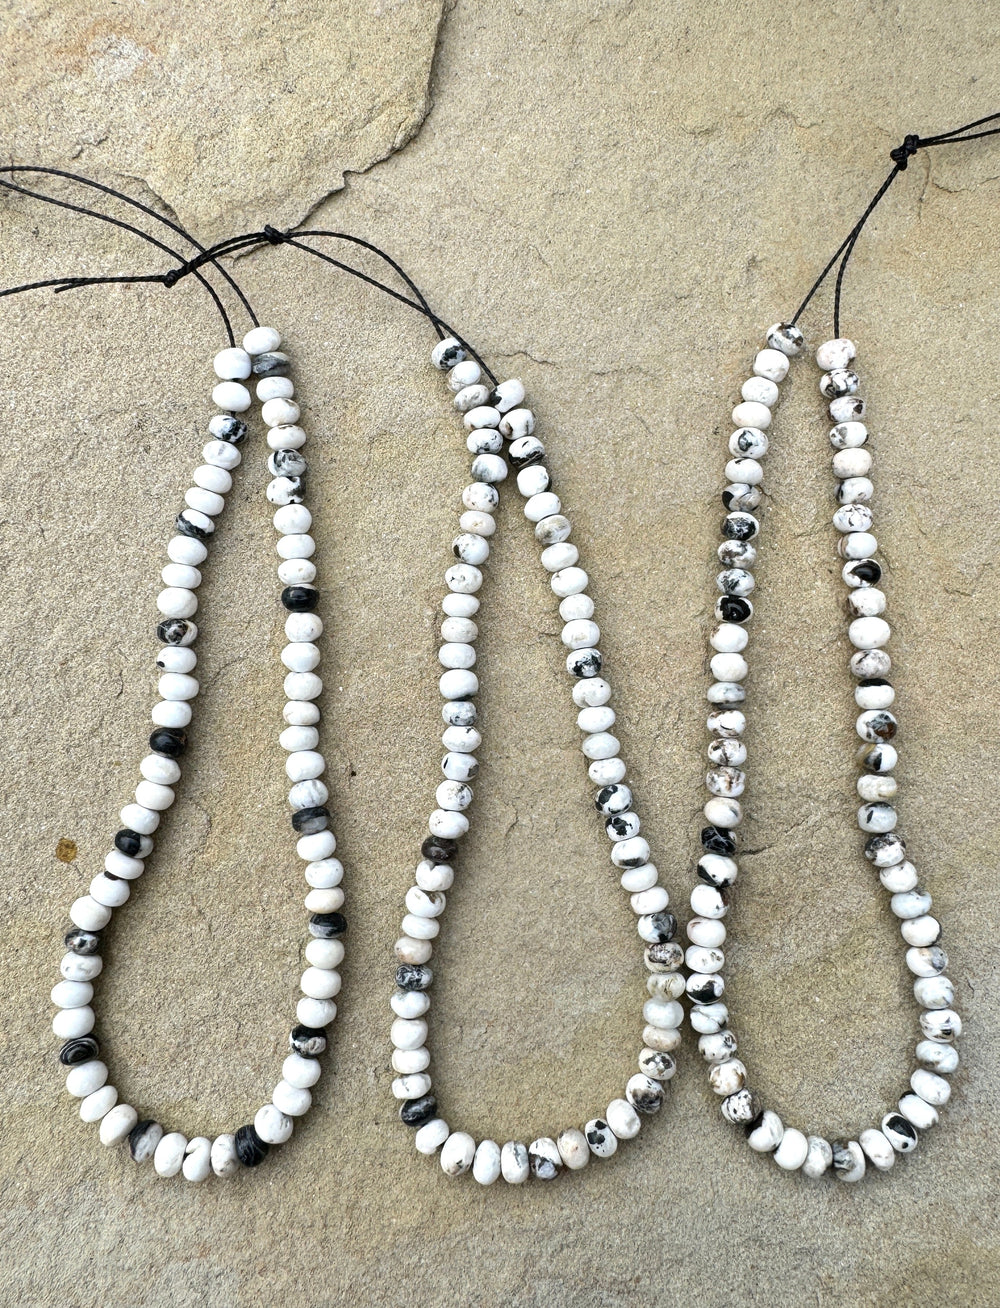 RARE High Quality White Buffalo 5mm Rondell Beads (9 inch